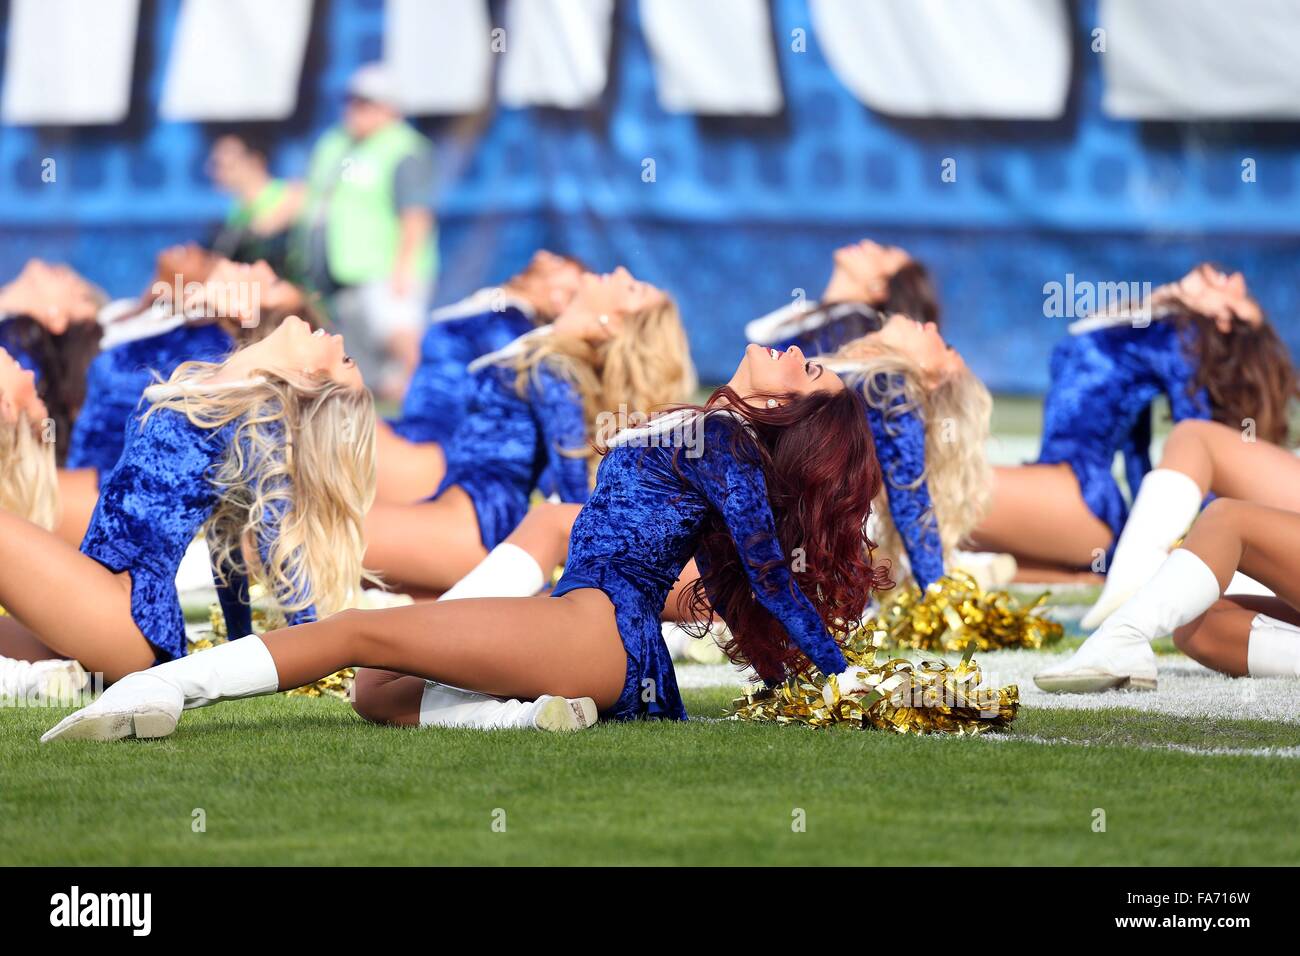 December 20, 2015 San Diego Chargers cheerleaders in action during the NFL Football game between the Miami Dolphins and the San Diego Chargers at the Qualcomm Stadium in San Diego, California. The Chargers defeated the Dolphins 30-14.Charles Baus/CSM Stock Photo